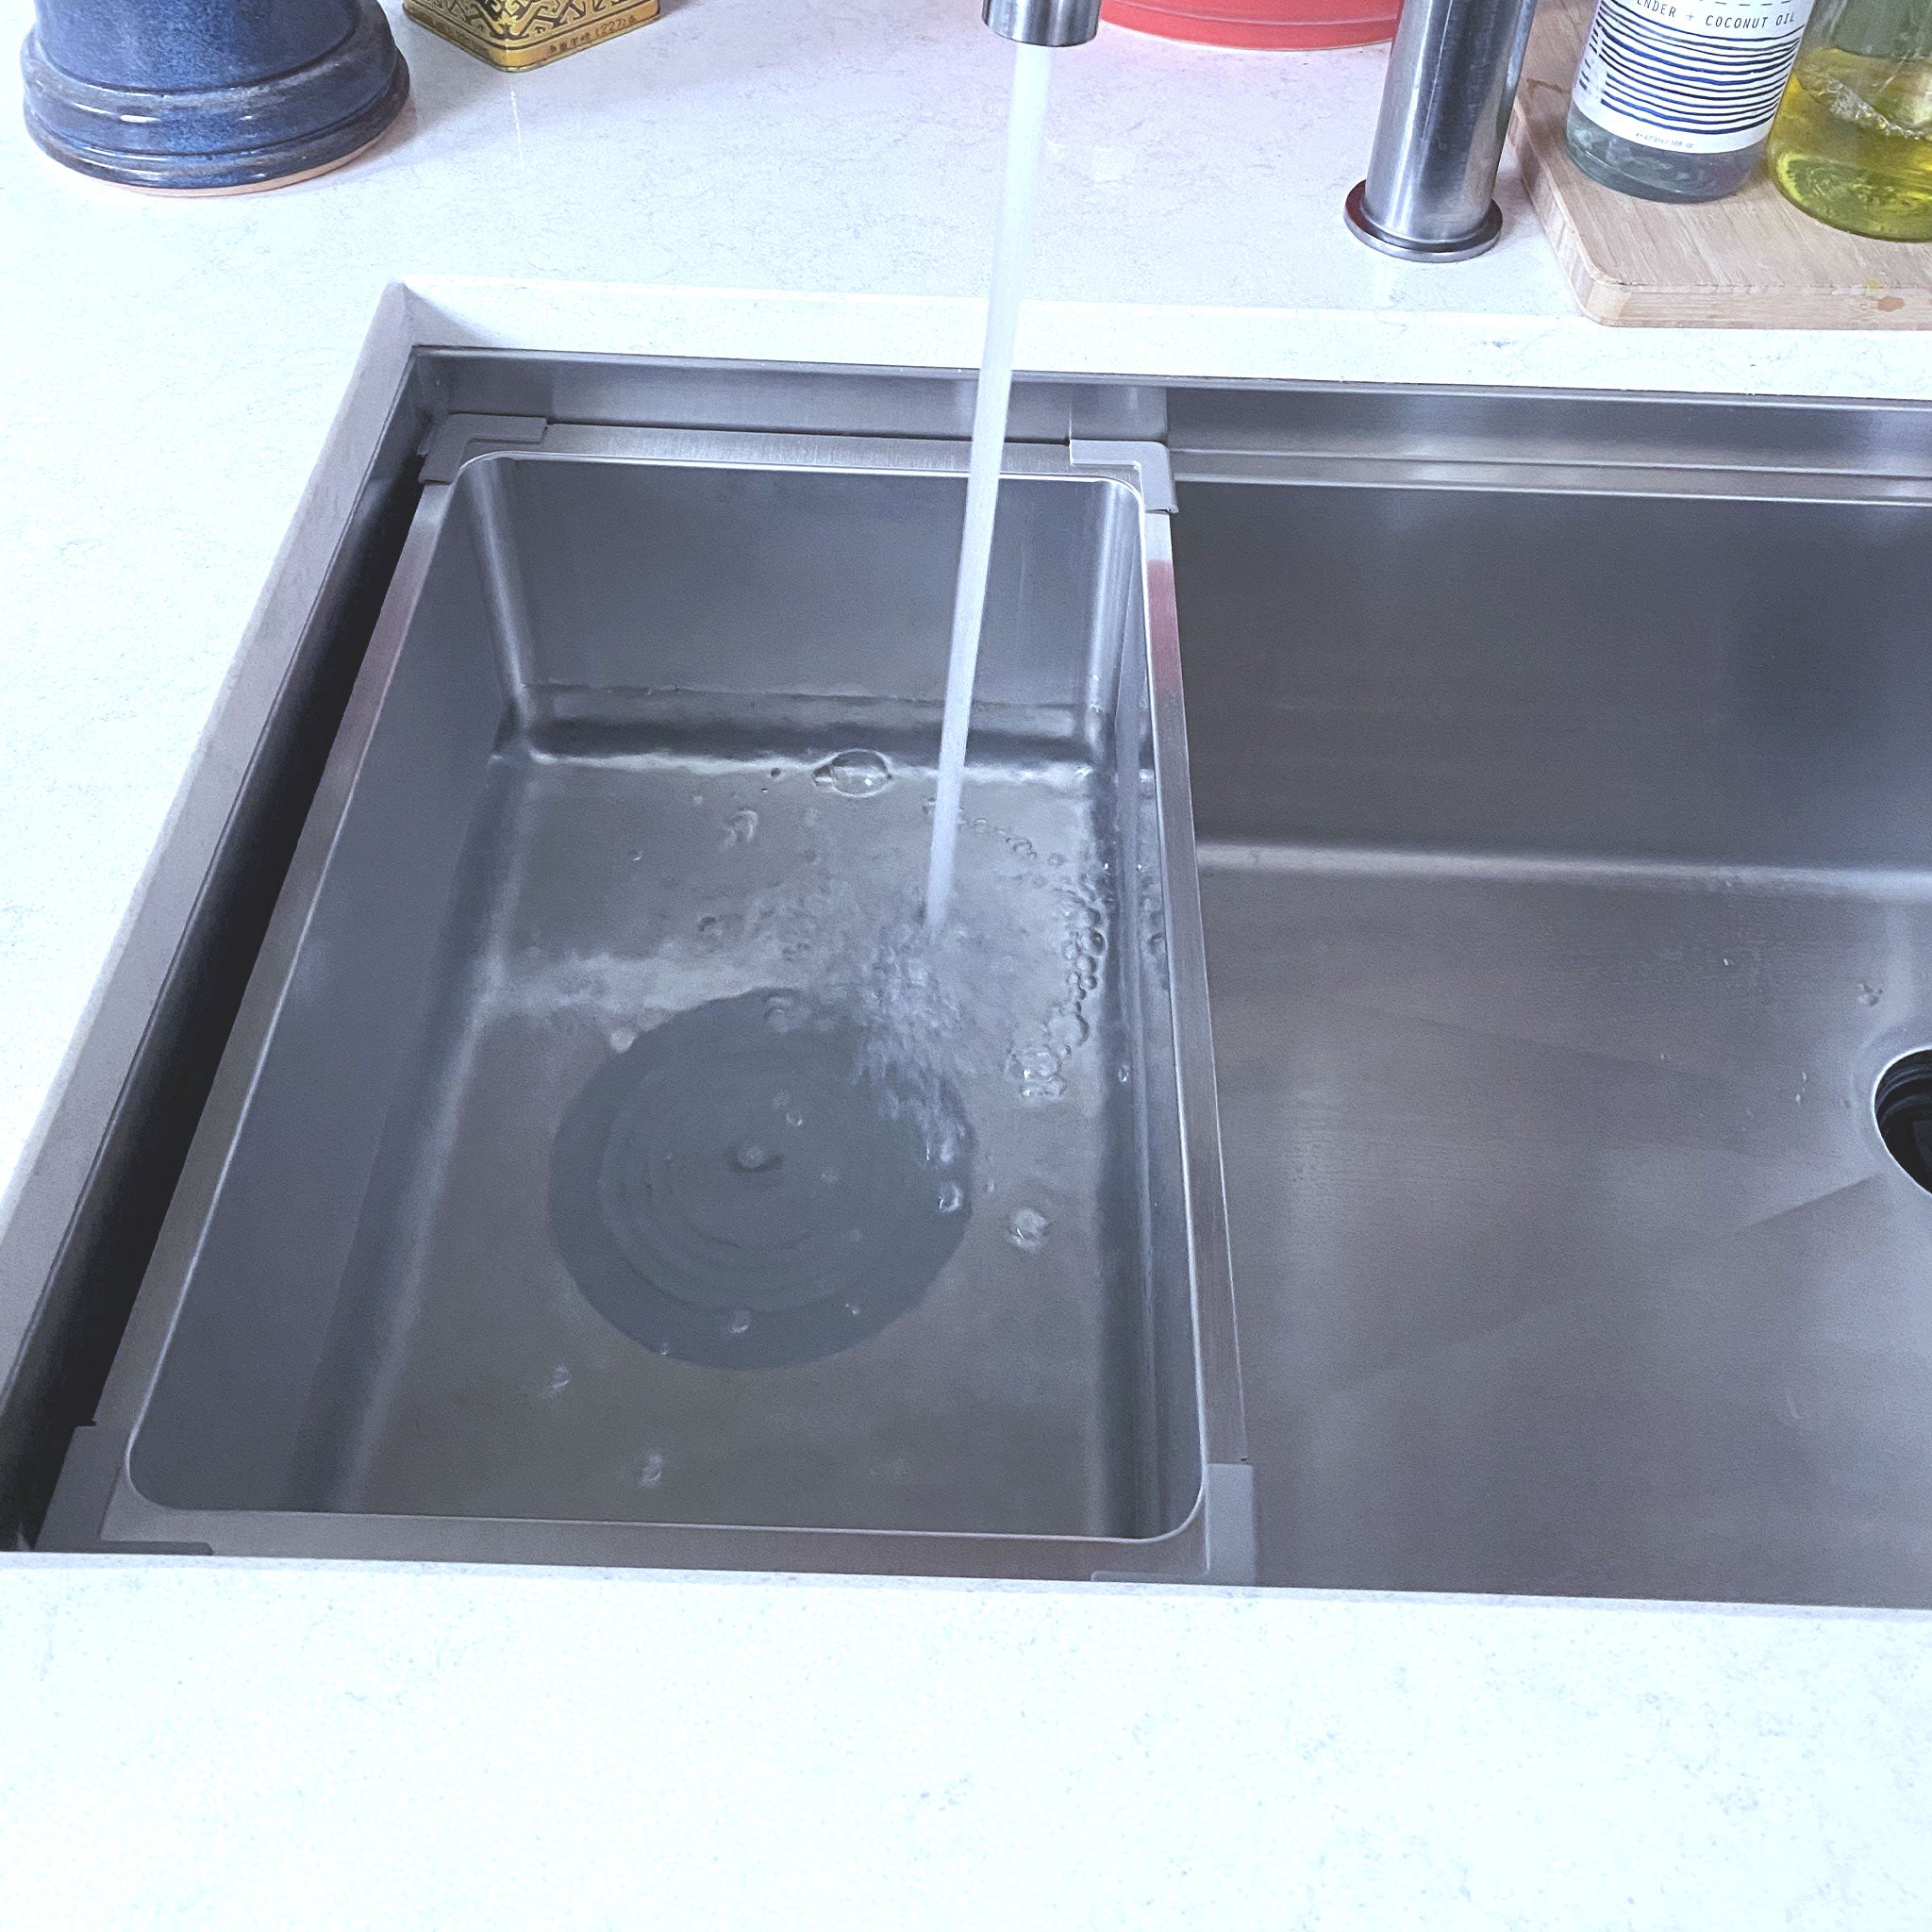 Stainless steel Beverage Tub Accessory for 10 inch deep Workstation Sink from Create Good Sinks